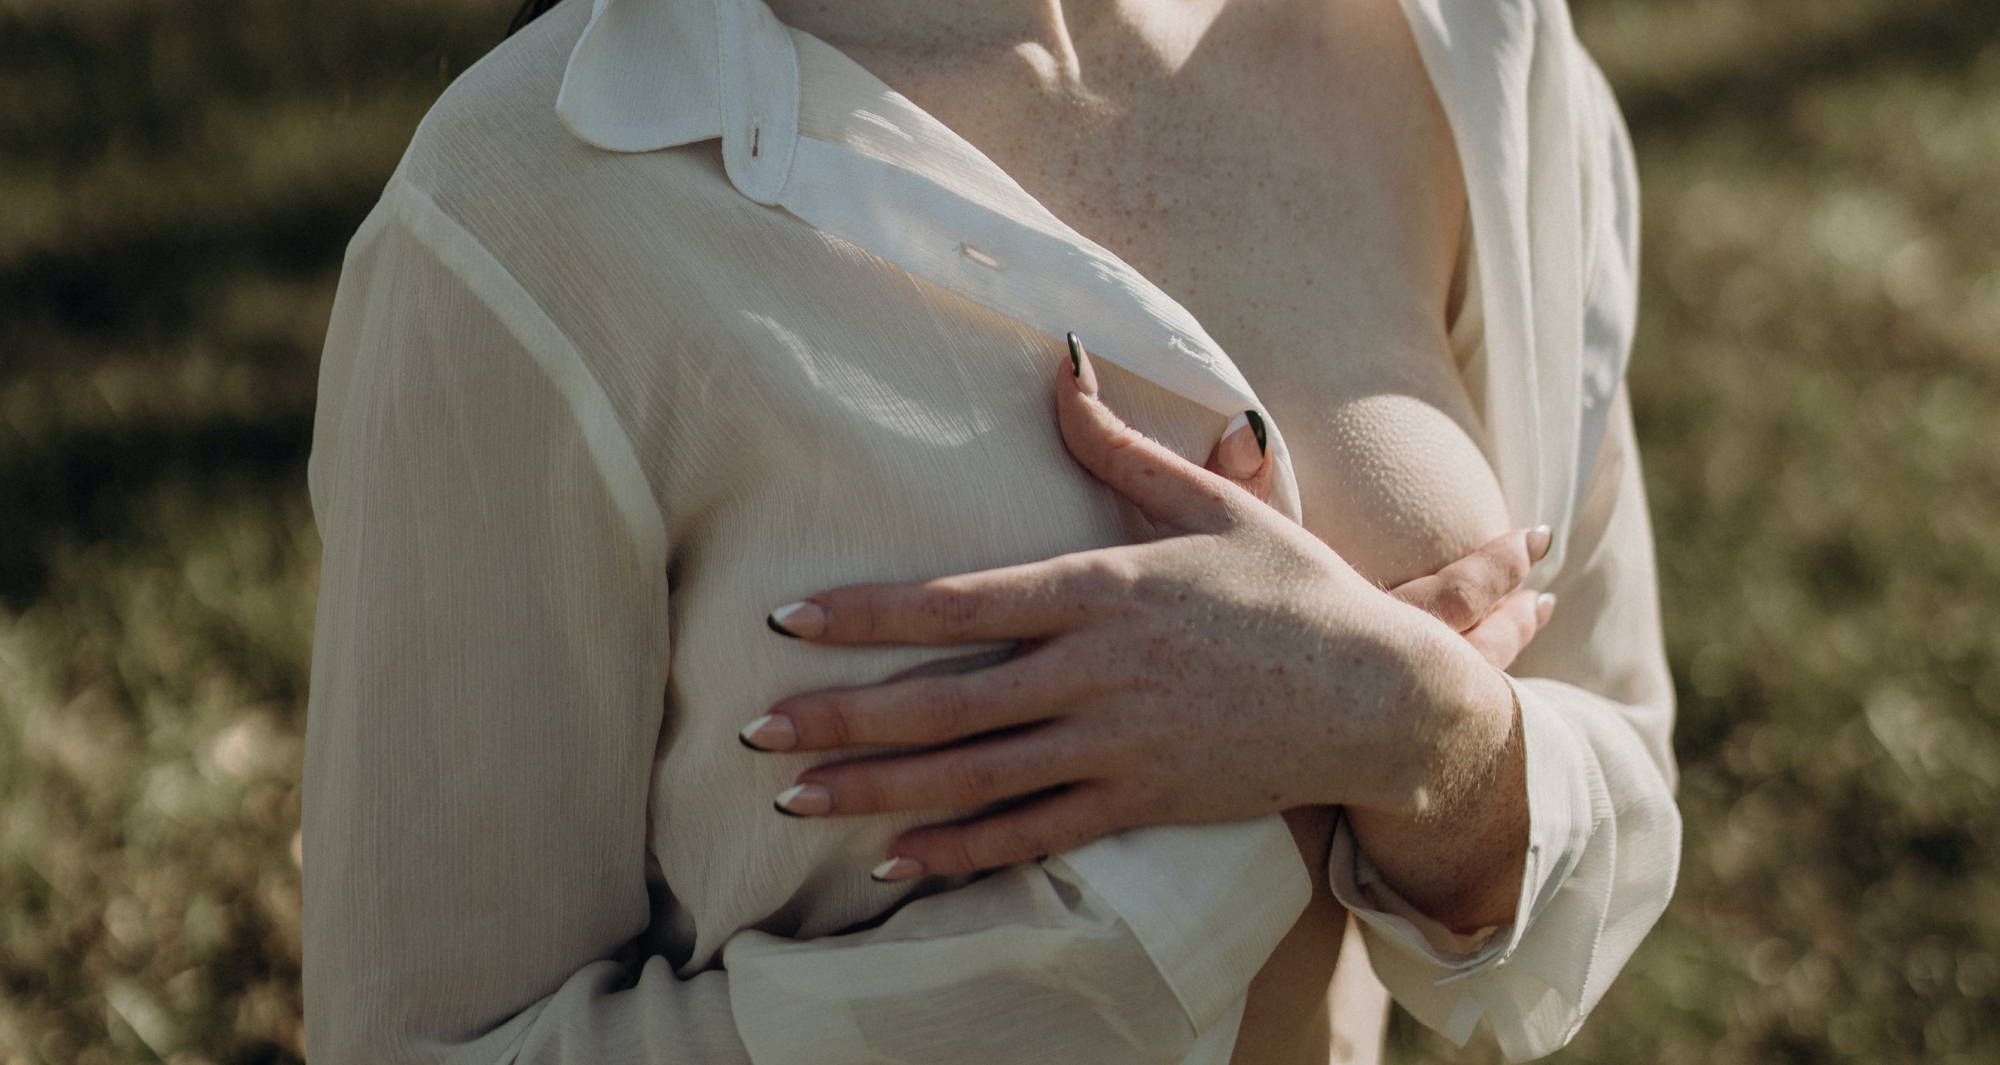  A woman wearing a lightweight, unbuttoned, white blouse stands outside and covers her breasts with both hands